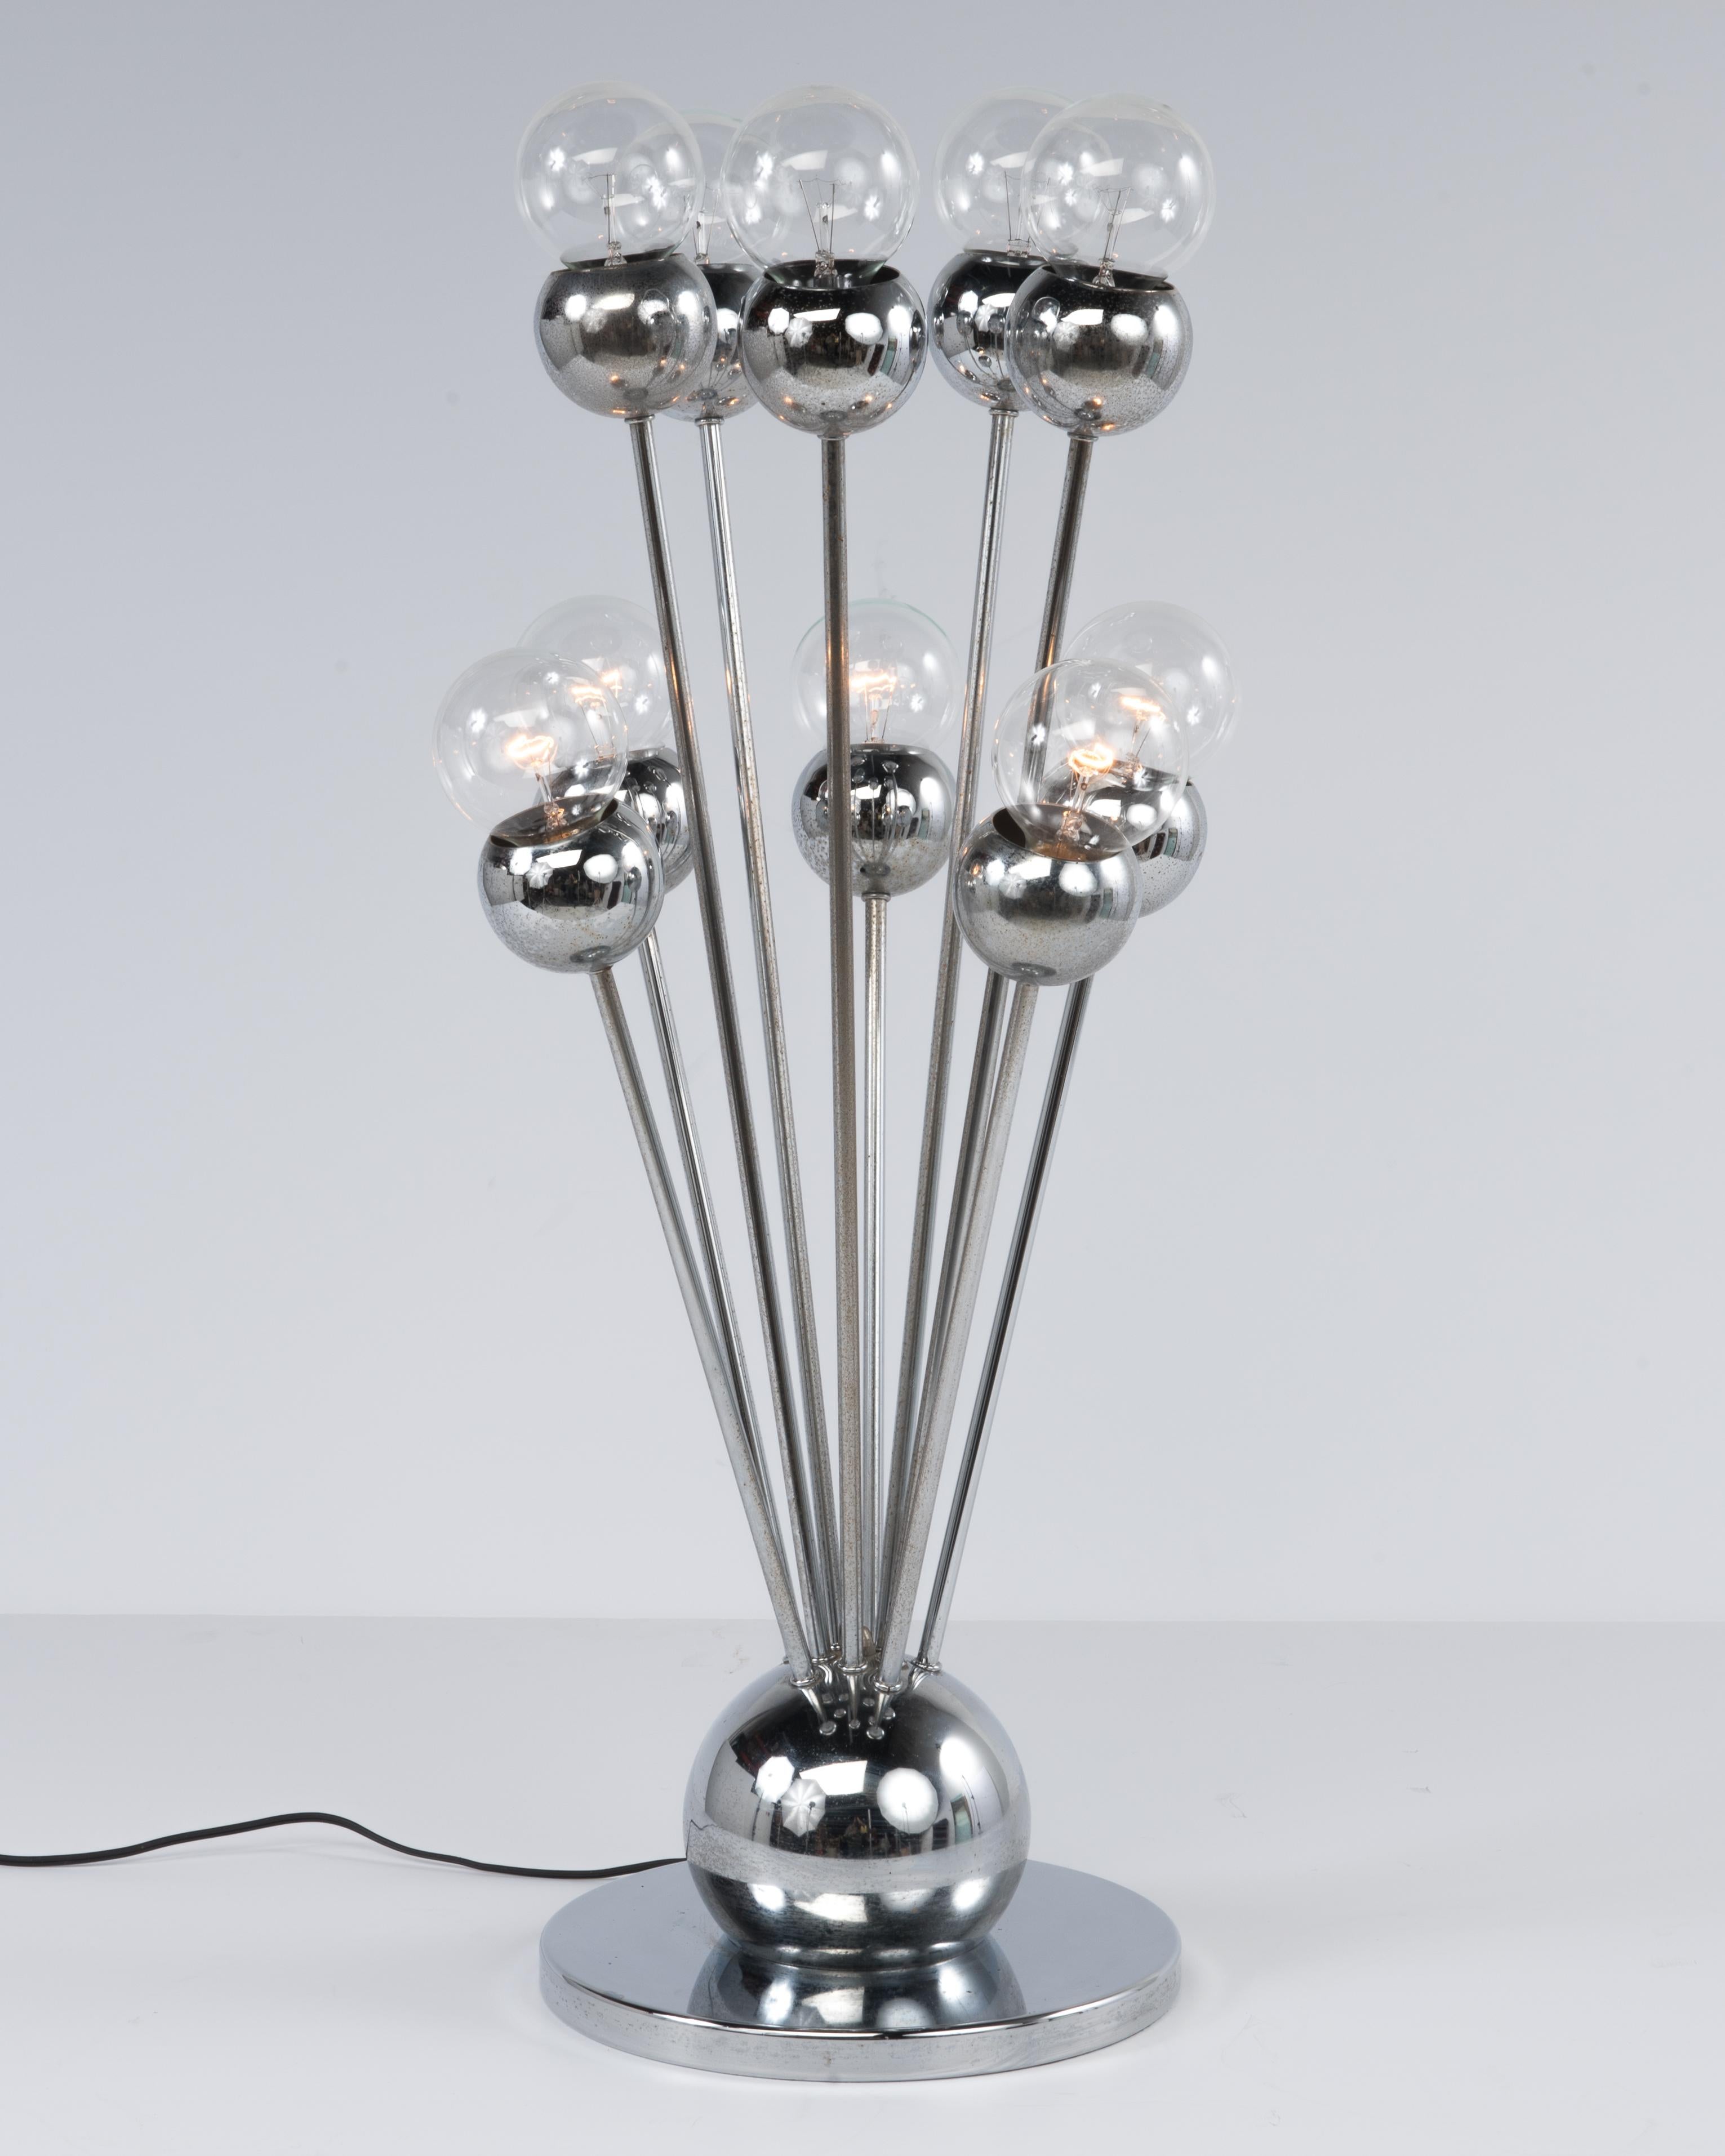 A large and impressive chrome table lamp attributed to Torino of Italy. The dimensions given are as shown in the first photograph. Without the bulbs the height is 28 1/2 inches. The base is 11.25 inches around. The new light bulbs used only for the